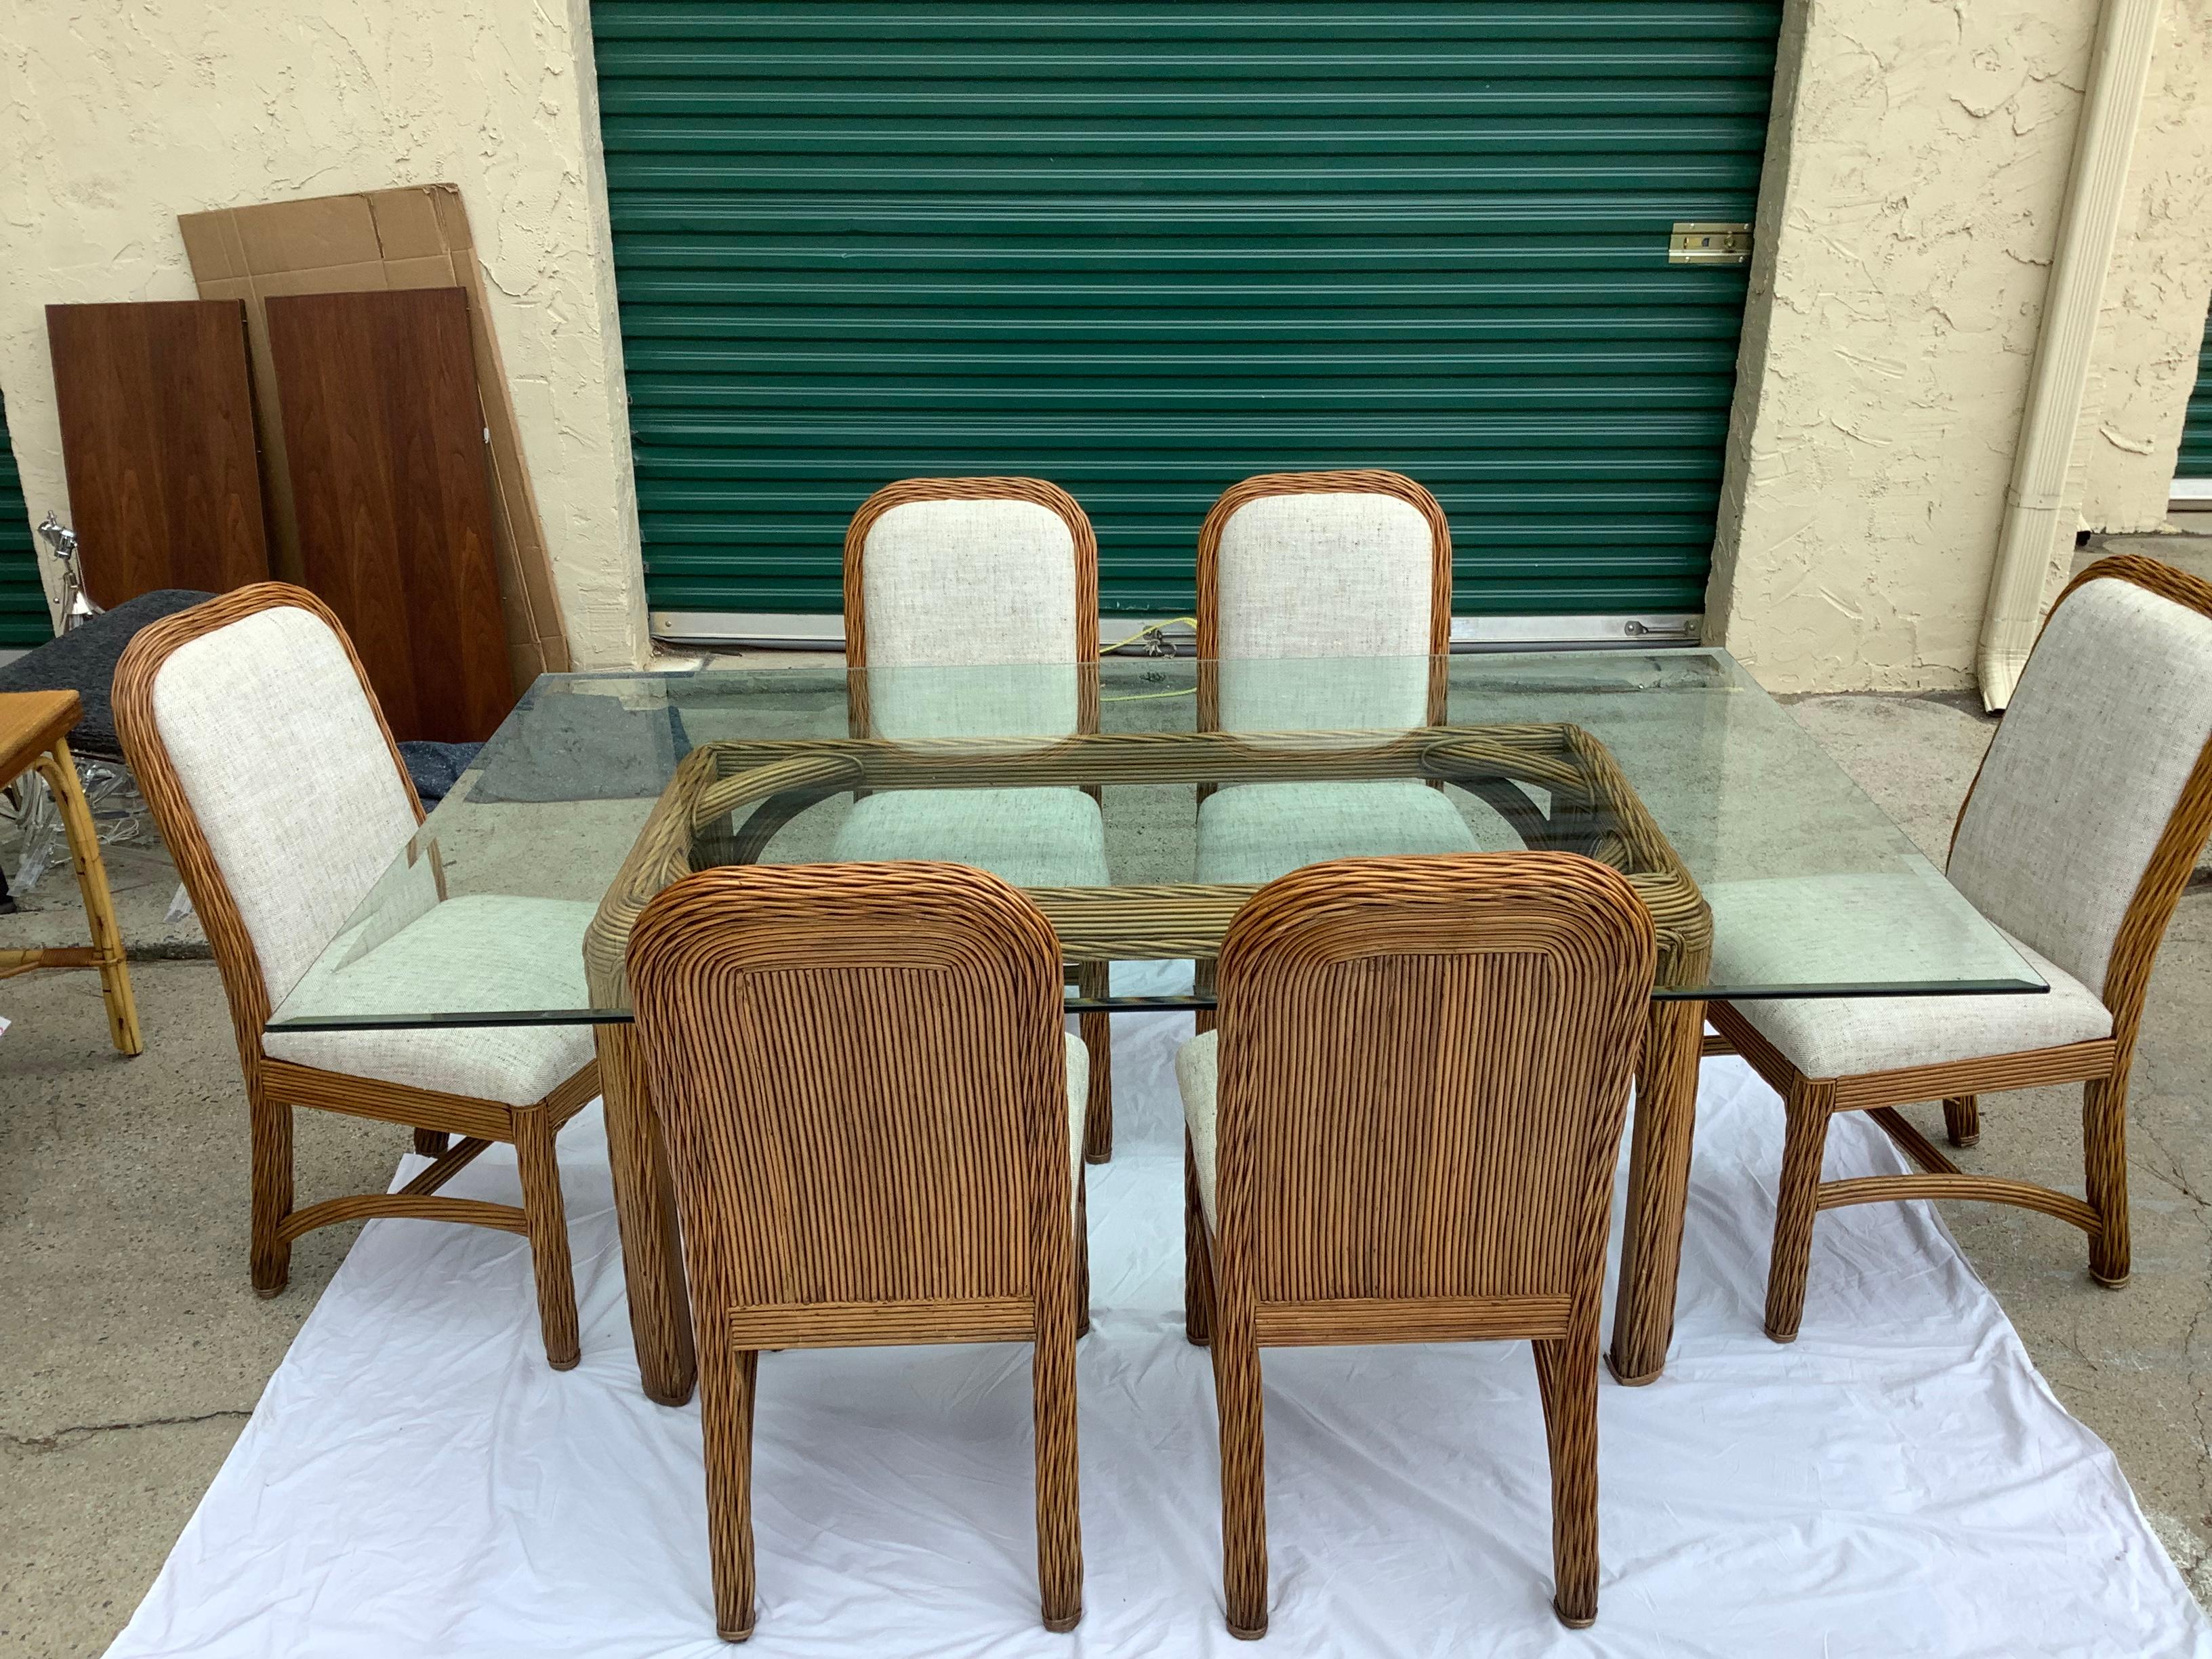 Post-Modern Woven Reed Dining Table w/ 8 Chairs, Crespi Style For Sale